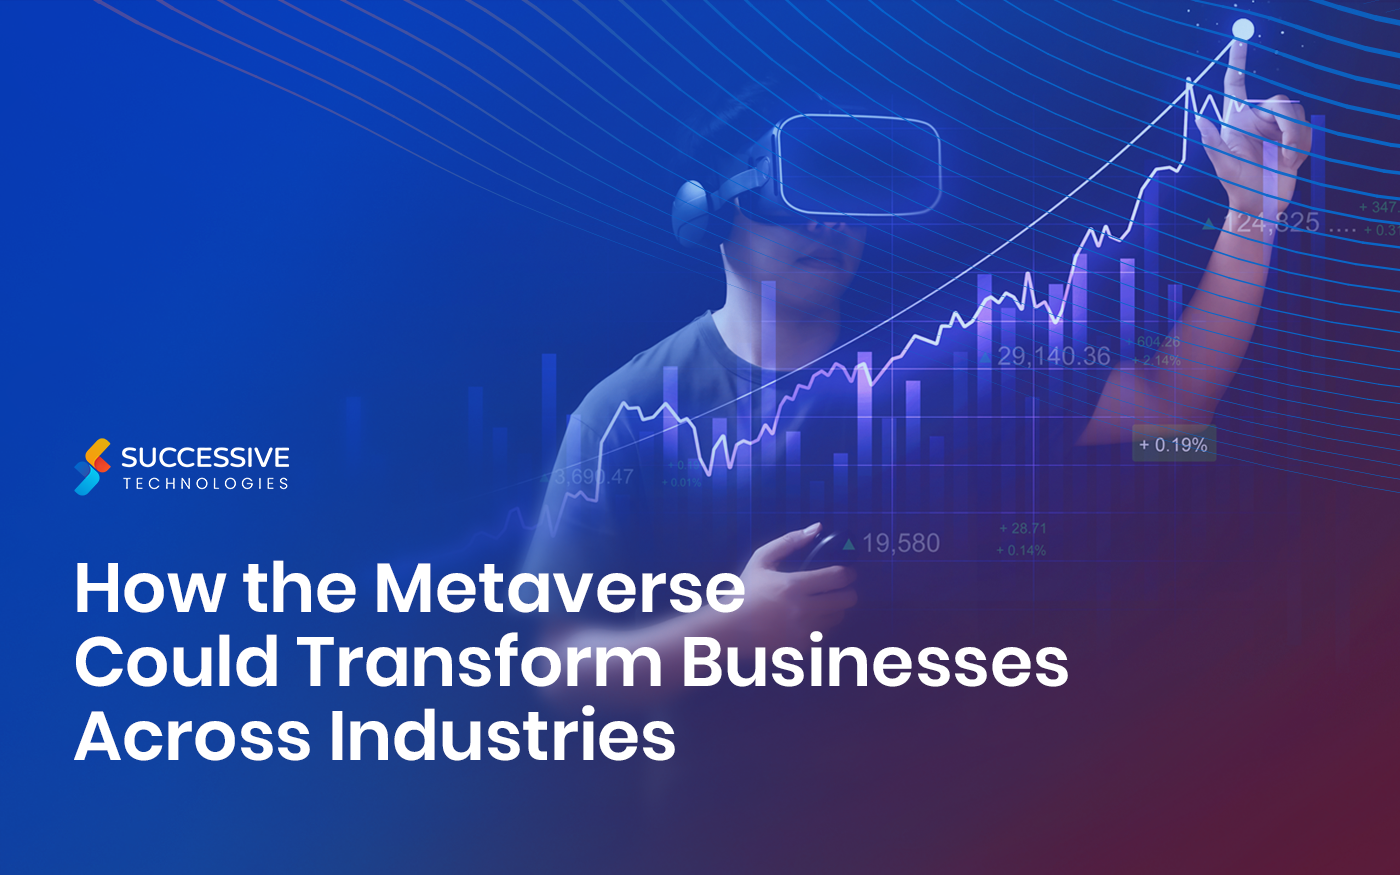 How the Metaverse Could Transform Businesses Across Industries